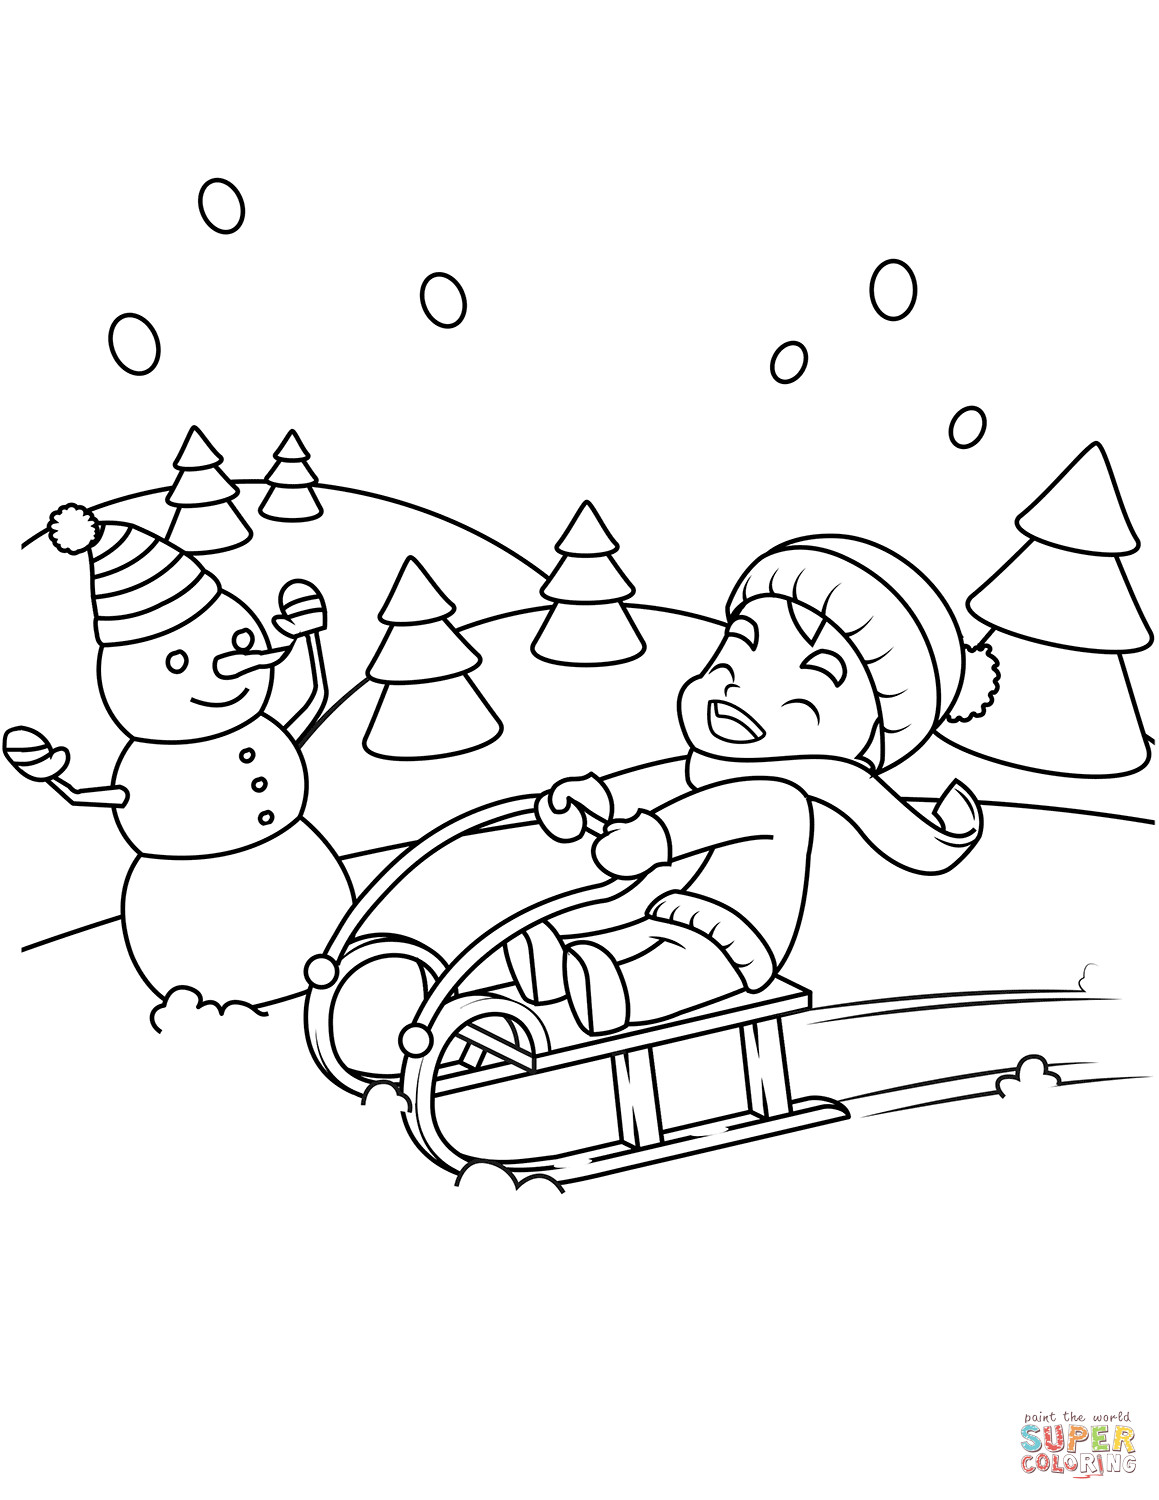 Coloring Pages For Boys Easy Wintewr
 Little Boy Riding a Sledge coloring page